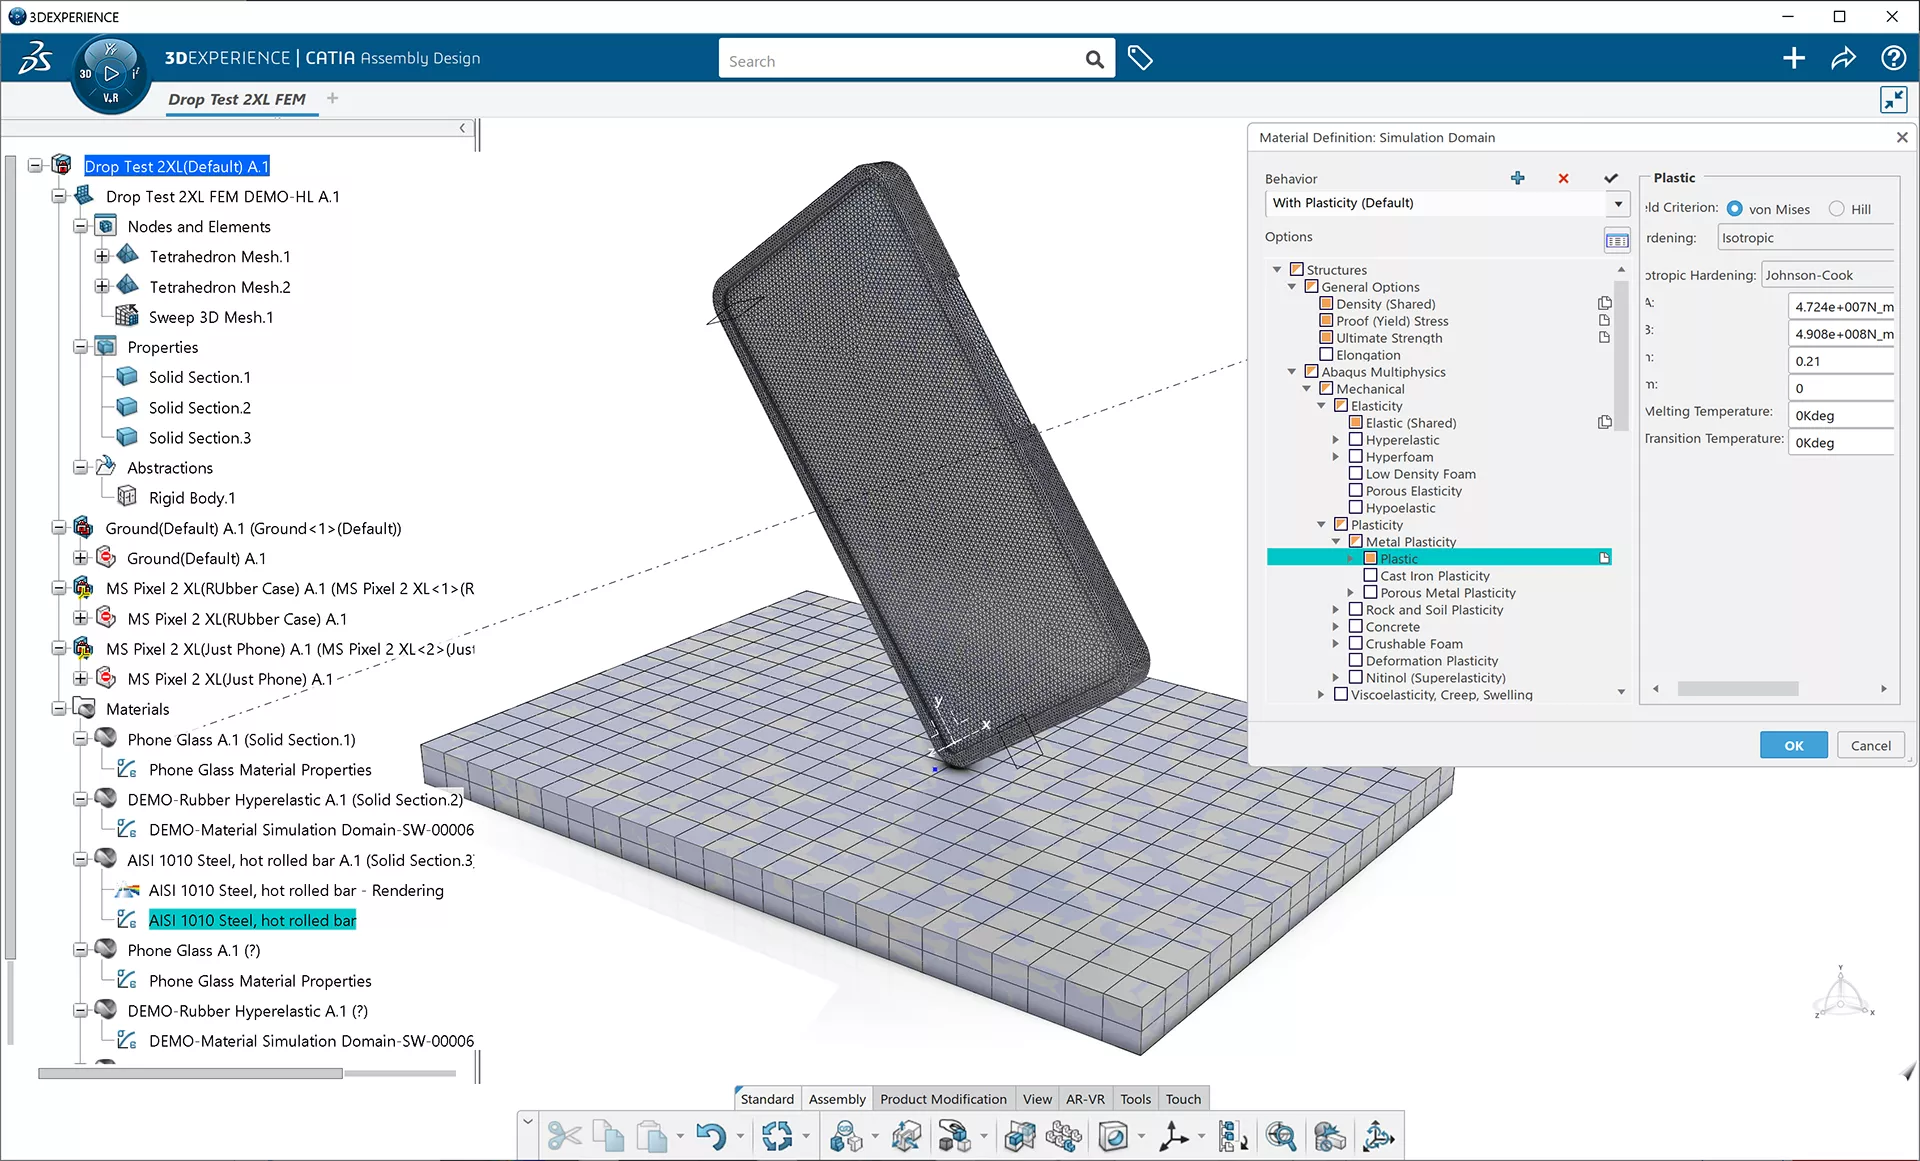 Assigning materials in Abaqus on the 3DEXPERIENCE Platform